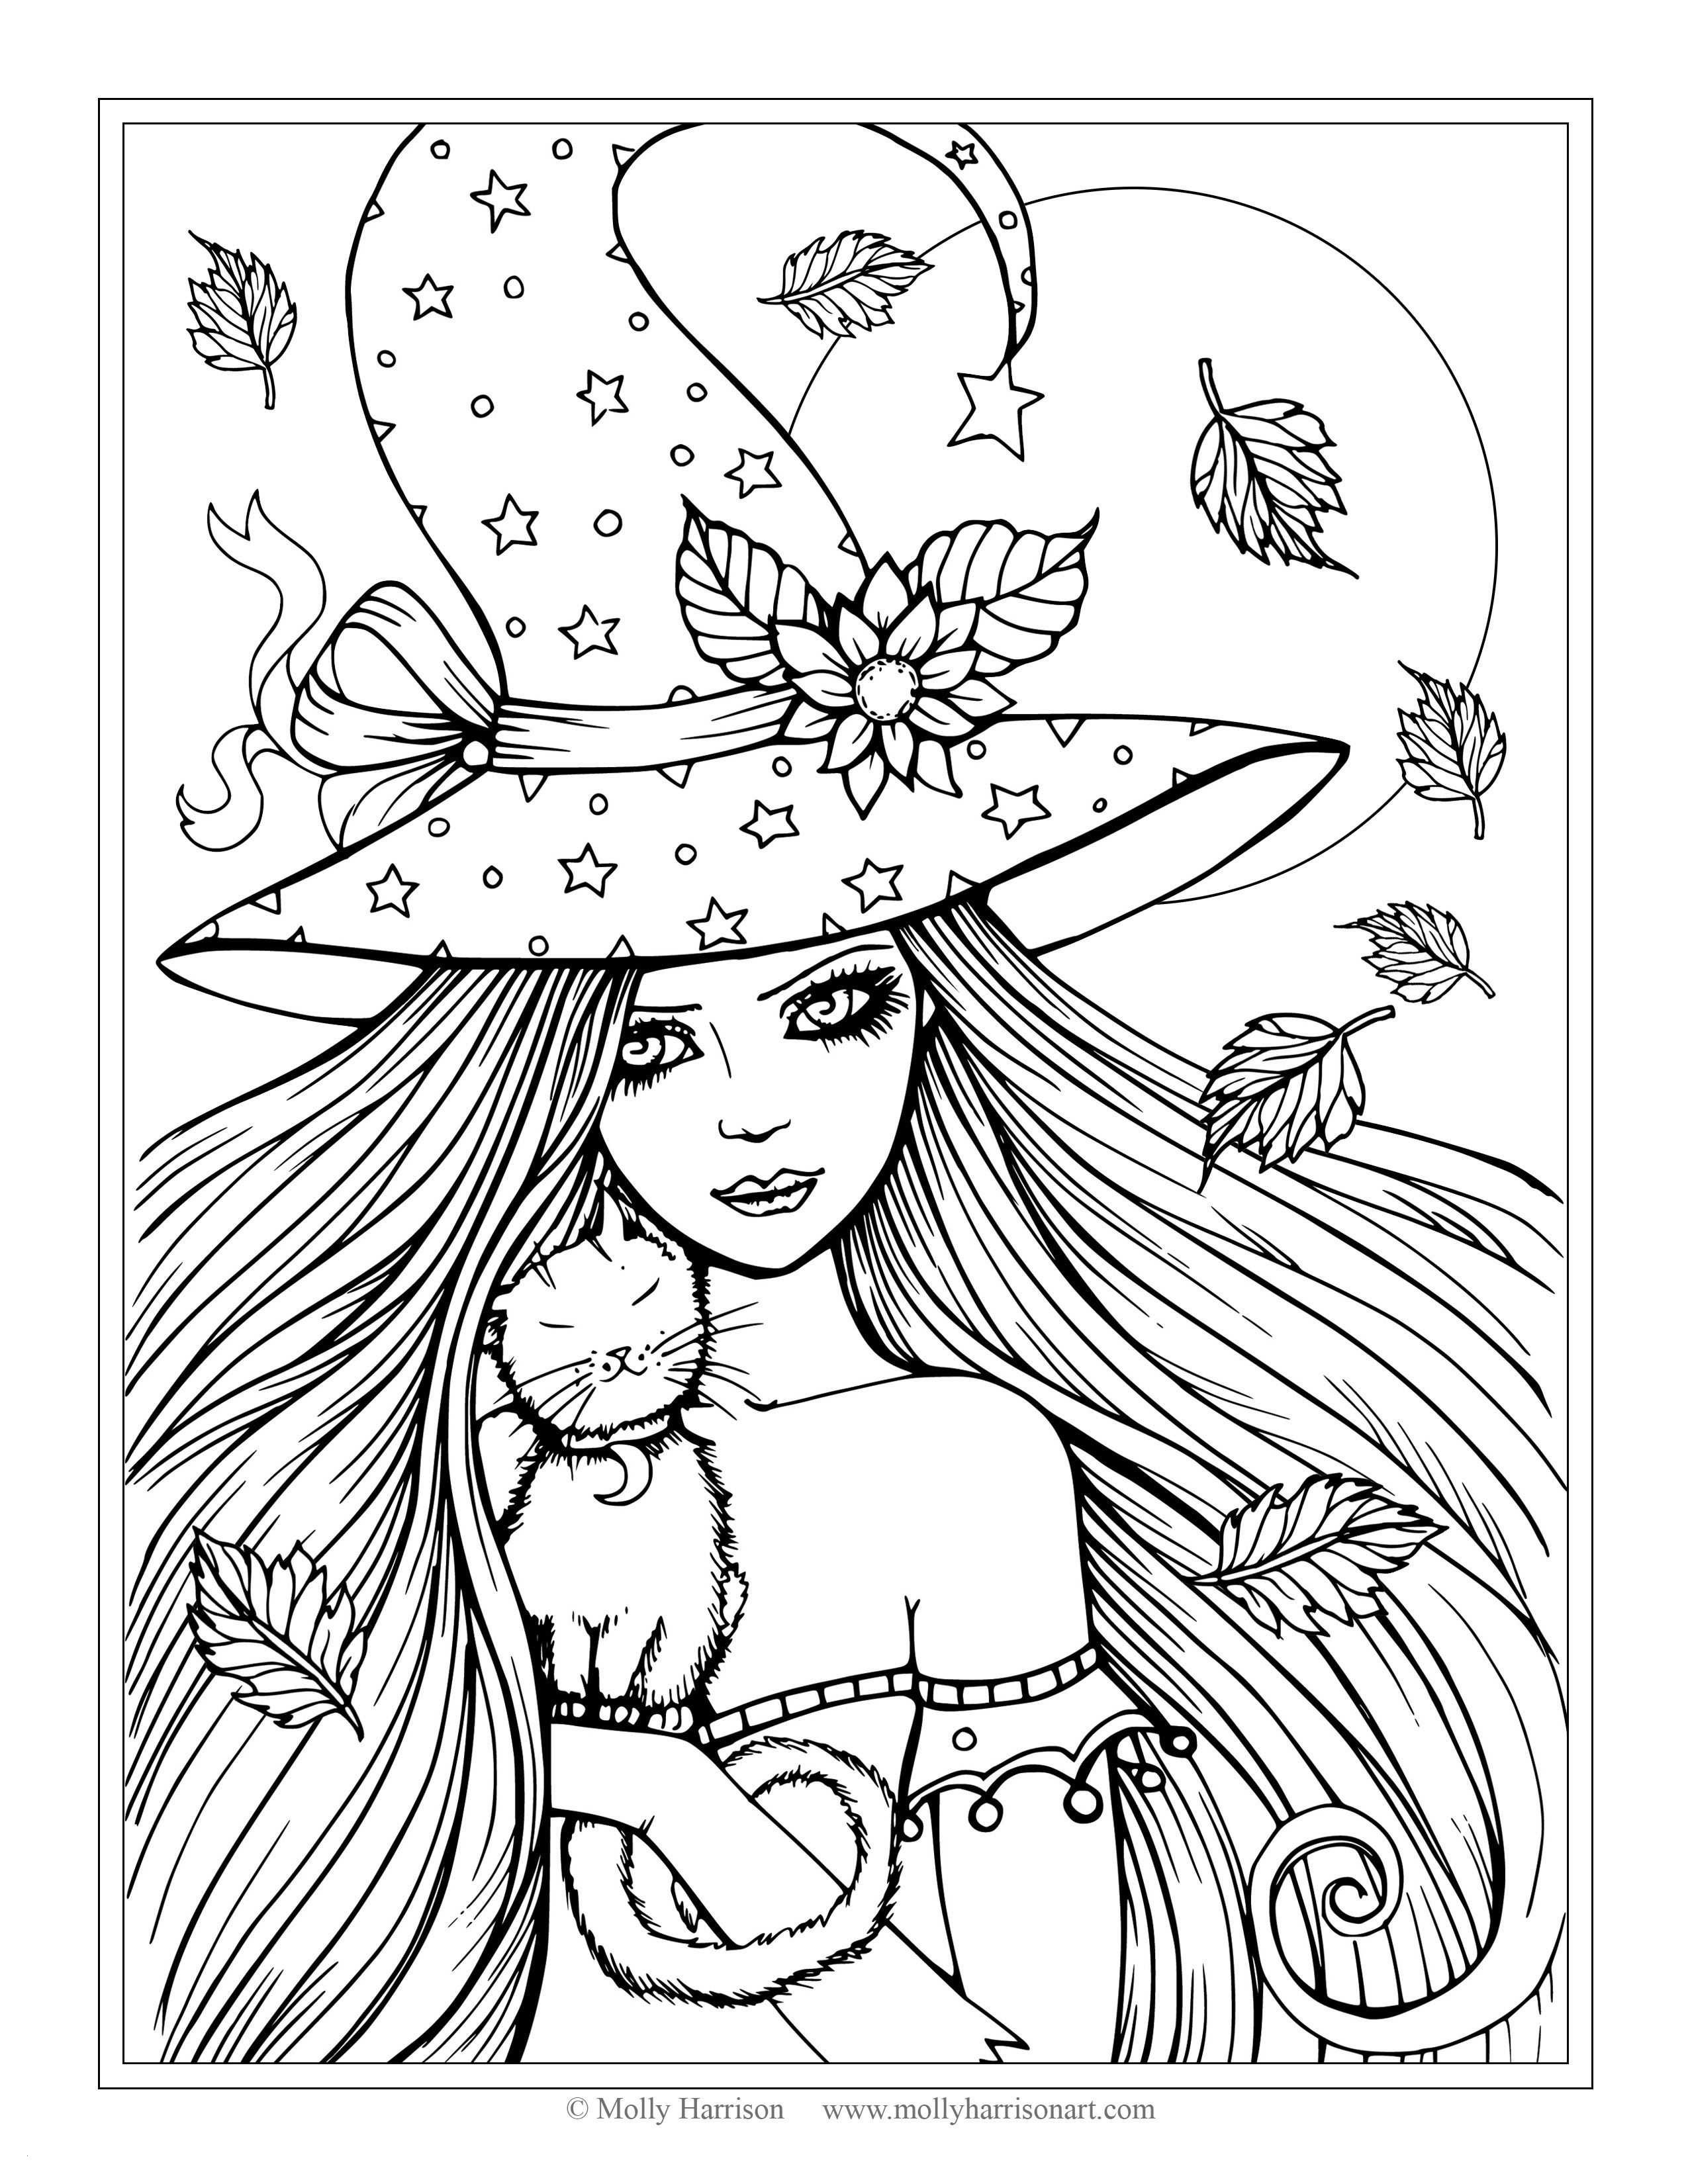 Cat Coloring Pages Elegant Cool Coloring Page Unique Witch Coloring Pages New Crayola Pages 0d